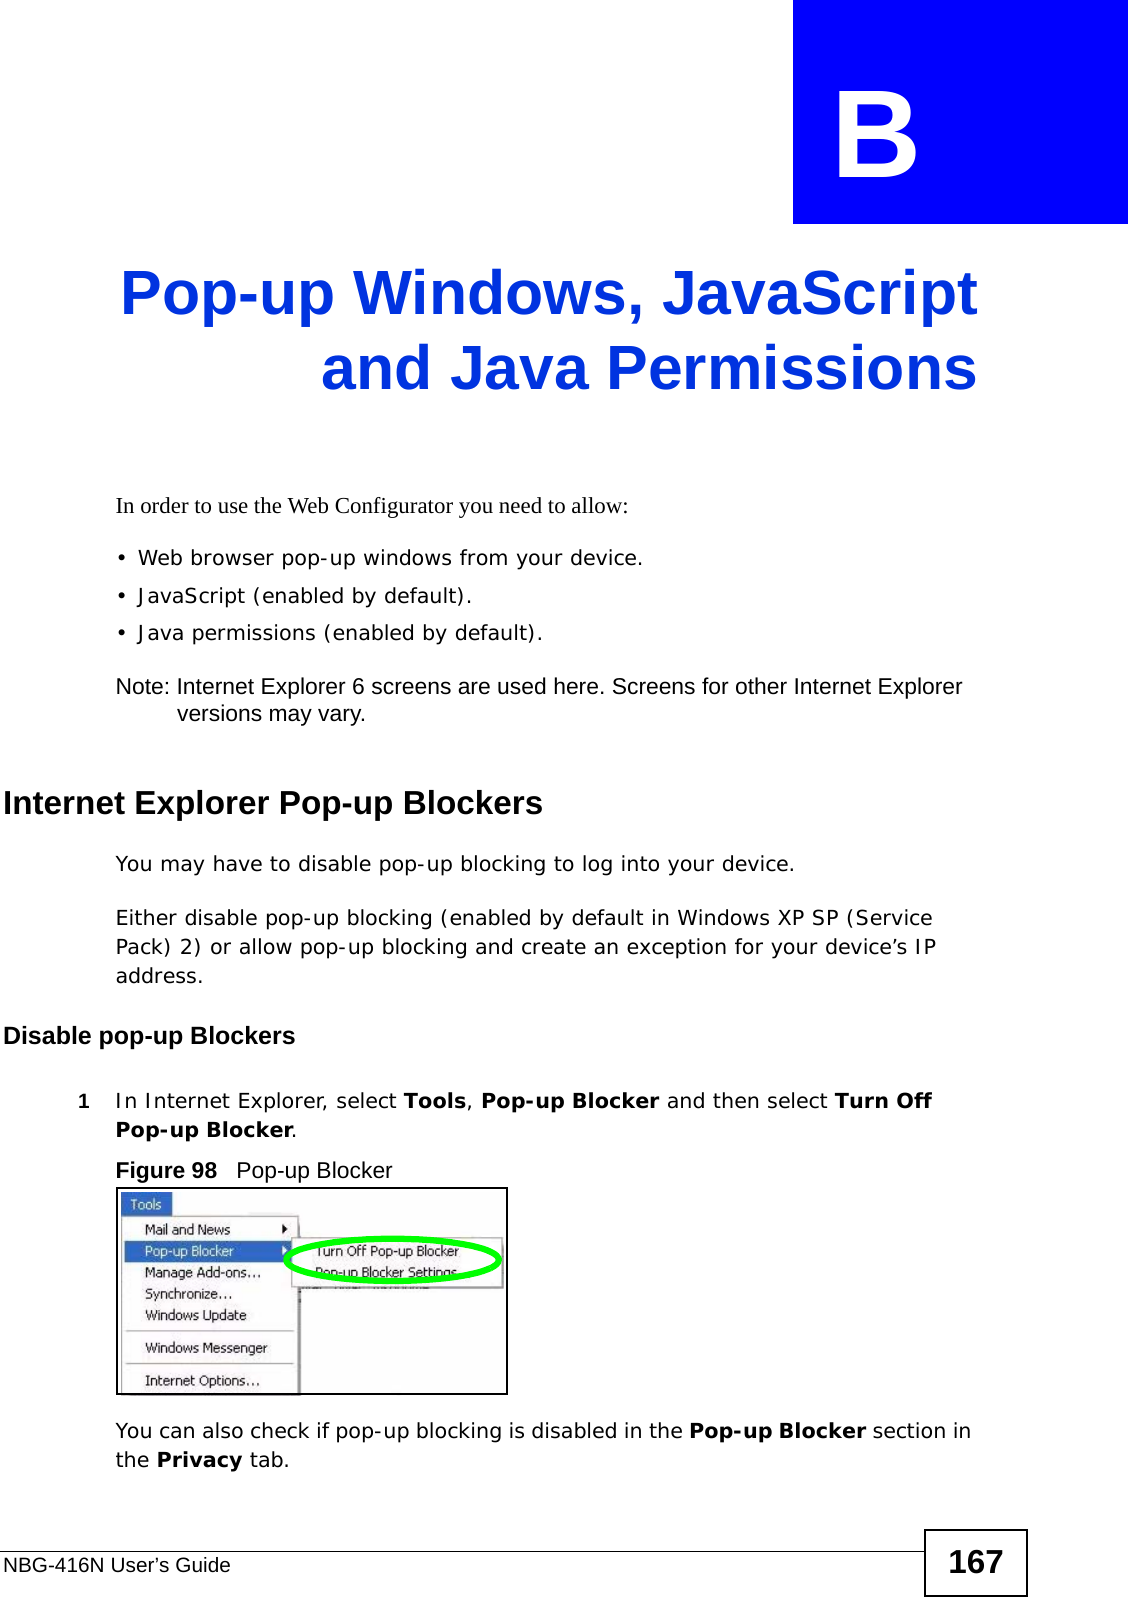 NBG-416N User’s Guide 167APPENDIX  B Pop-up Windows, JavaScriptand Java PermissionsIn order to use the Web Configurator you need to allow:• Web browser pop-up windows from your device.• JavaScript (enabled by default).• Java permissions (enabled by default).Note: Internet Explorer 6 screens are used here. Screens for other Internet Explorer versions may vary.Internet Explorer Pop-up BlockersYou may have to disable pop-up blocking to log into your device. Either disable pop-up blocking (enabled by default in Windows XP SP (Service Pack) 2) or allow pop-up blocking and create an exception for your device’s IP address.Disable pop-up Blockers1In Internet Explorer, select Tools, Pop-up Blocker and then select Turn Off Pop-up Blocker. Figure 98   Pop-up BlockerYou can also check if pop-up blocking is disabled in the Pop-up Blocker section in the Privacy tab. 